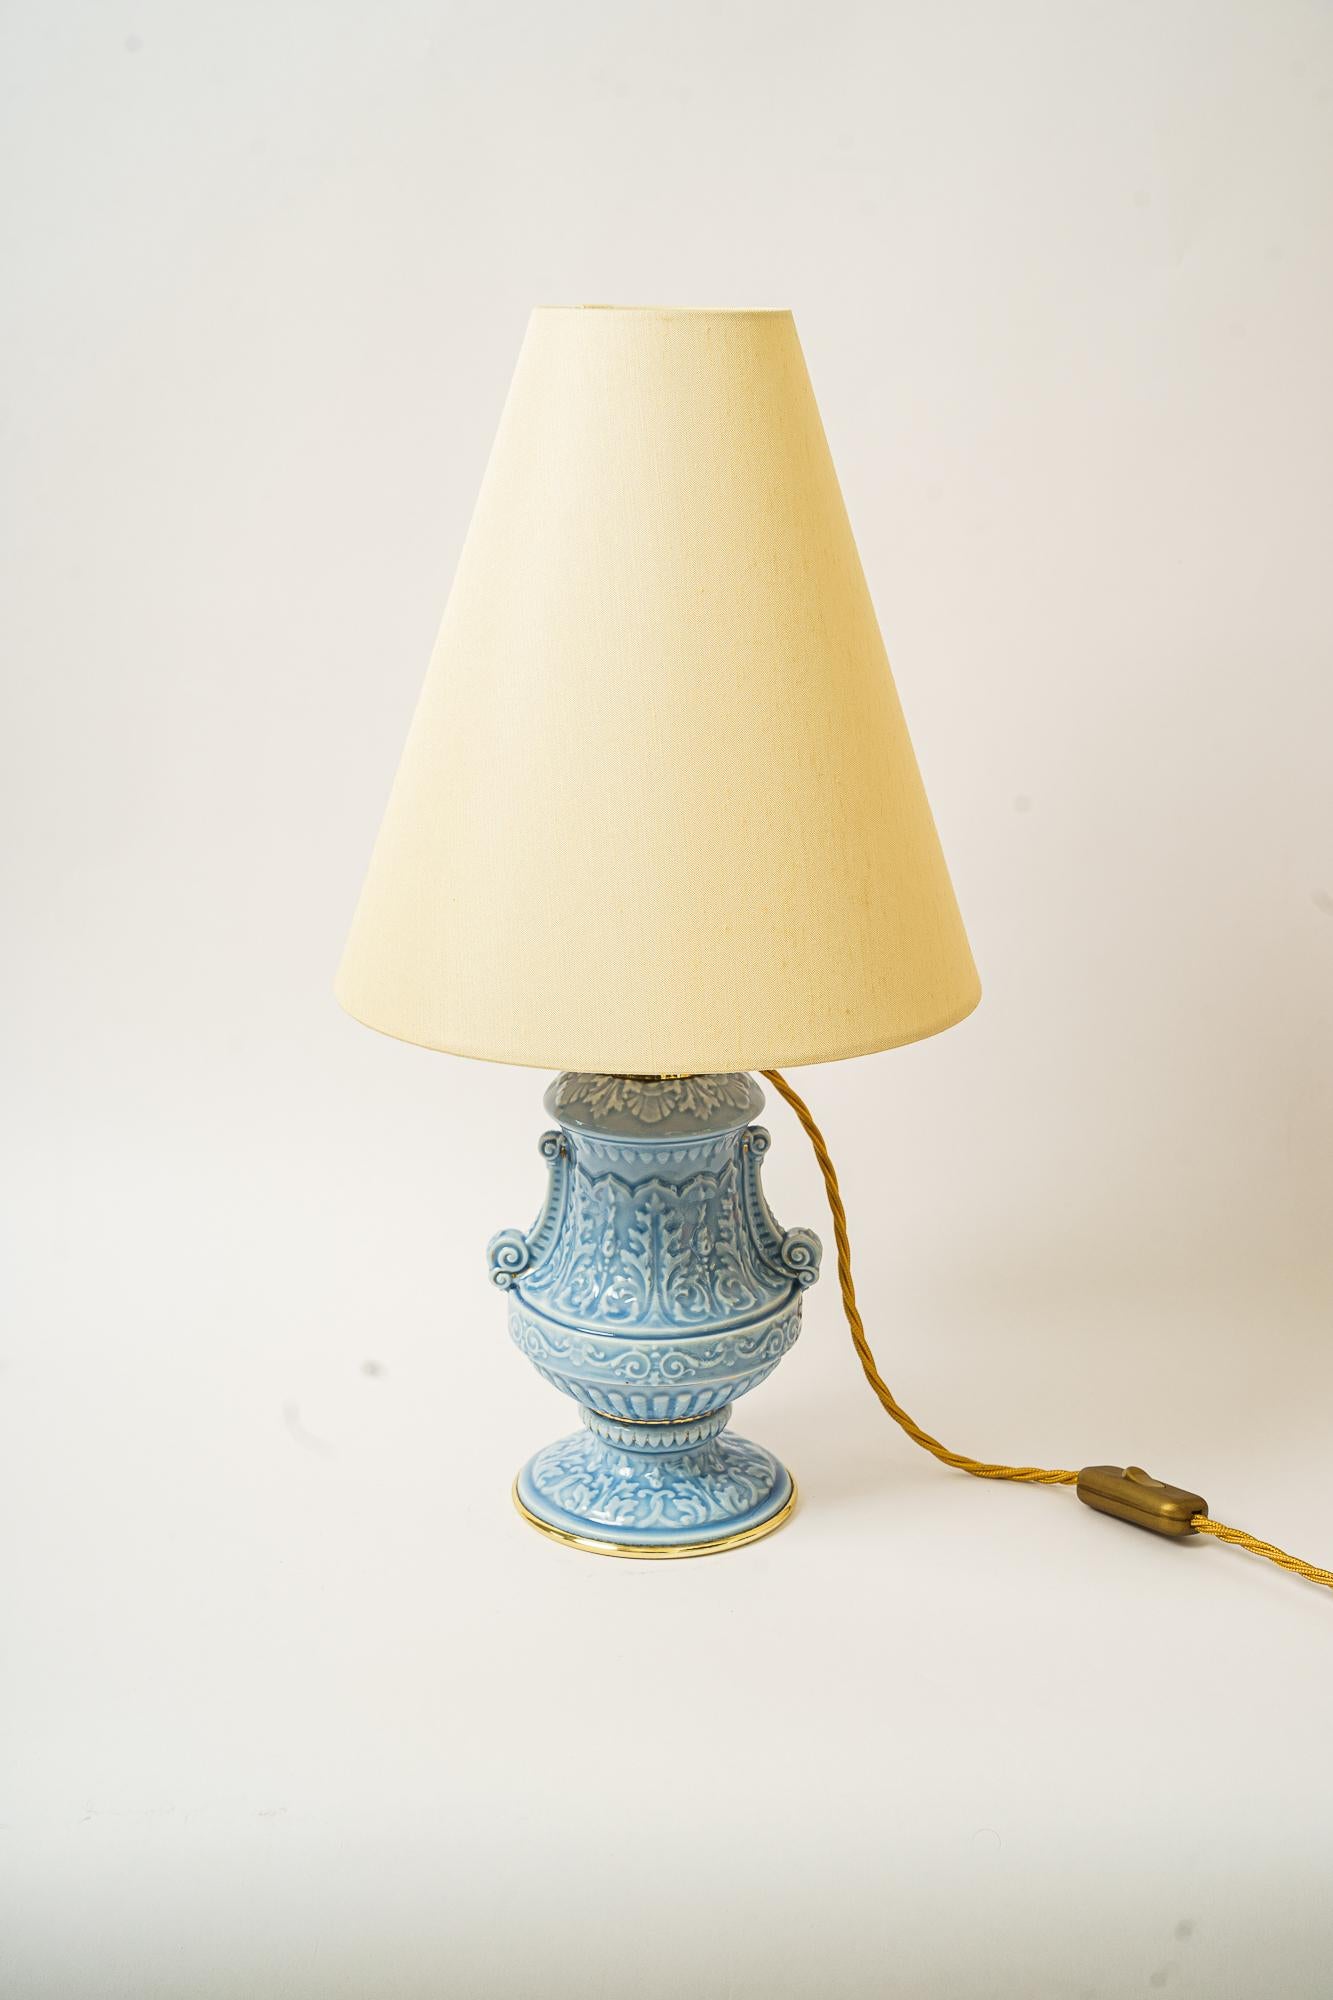 Art Deco ceramic table lamp with fabric shade vienna, circa 1930s
Brass parts polished and stove enameled
The ceramic is in original condition
The fabric shade is replaced ( new ).